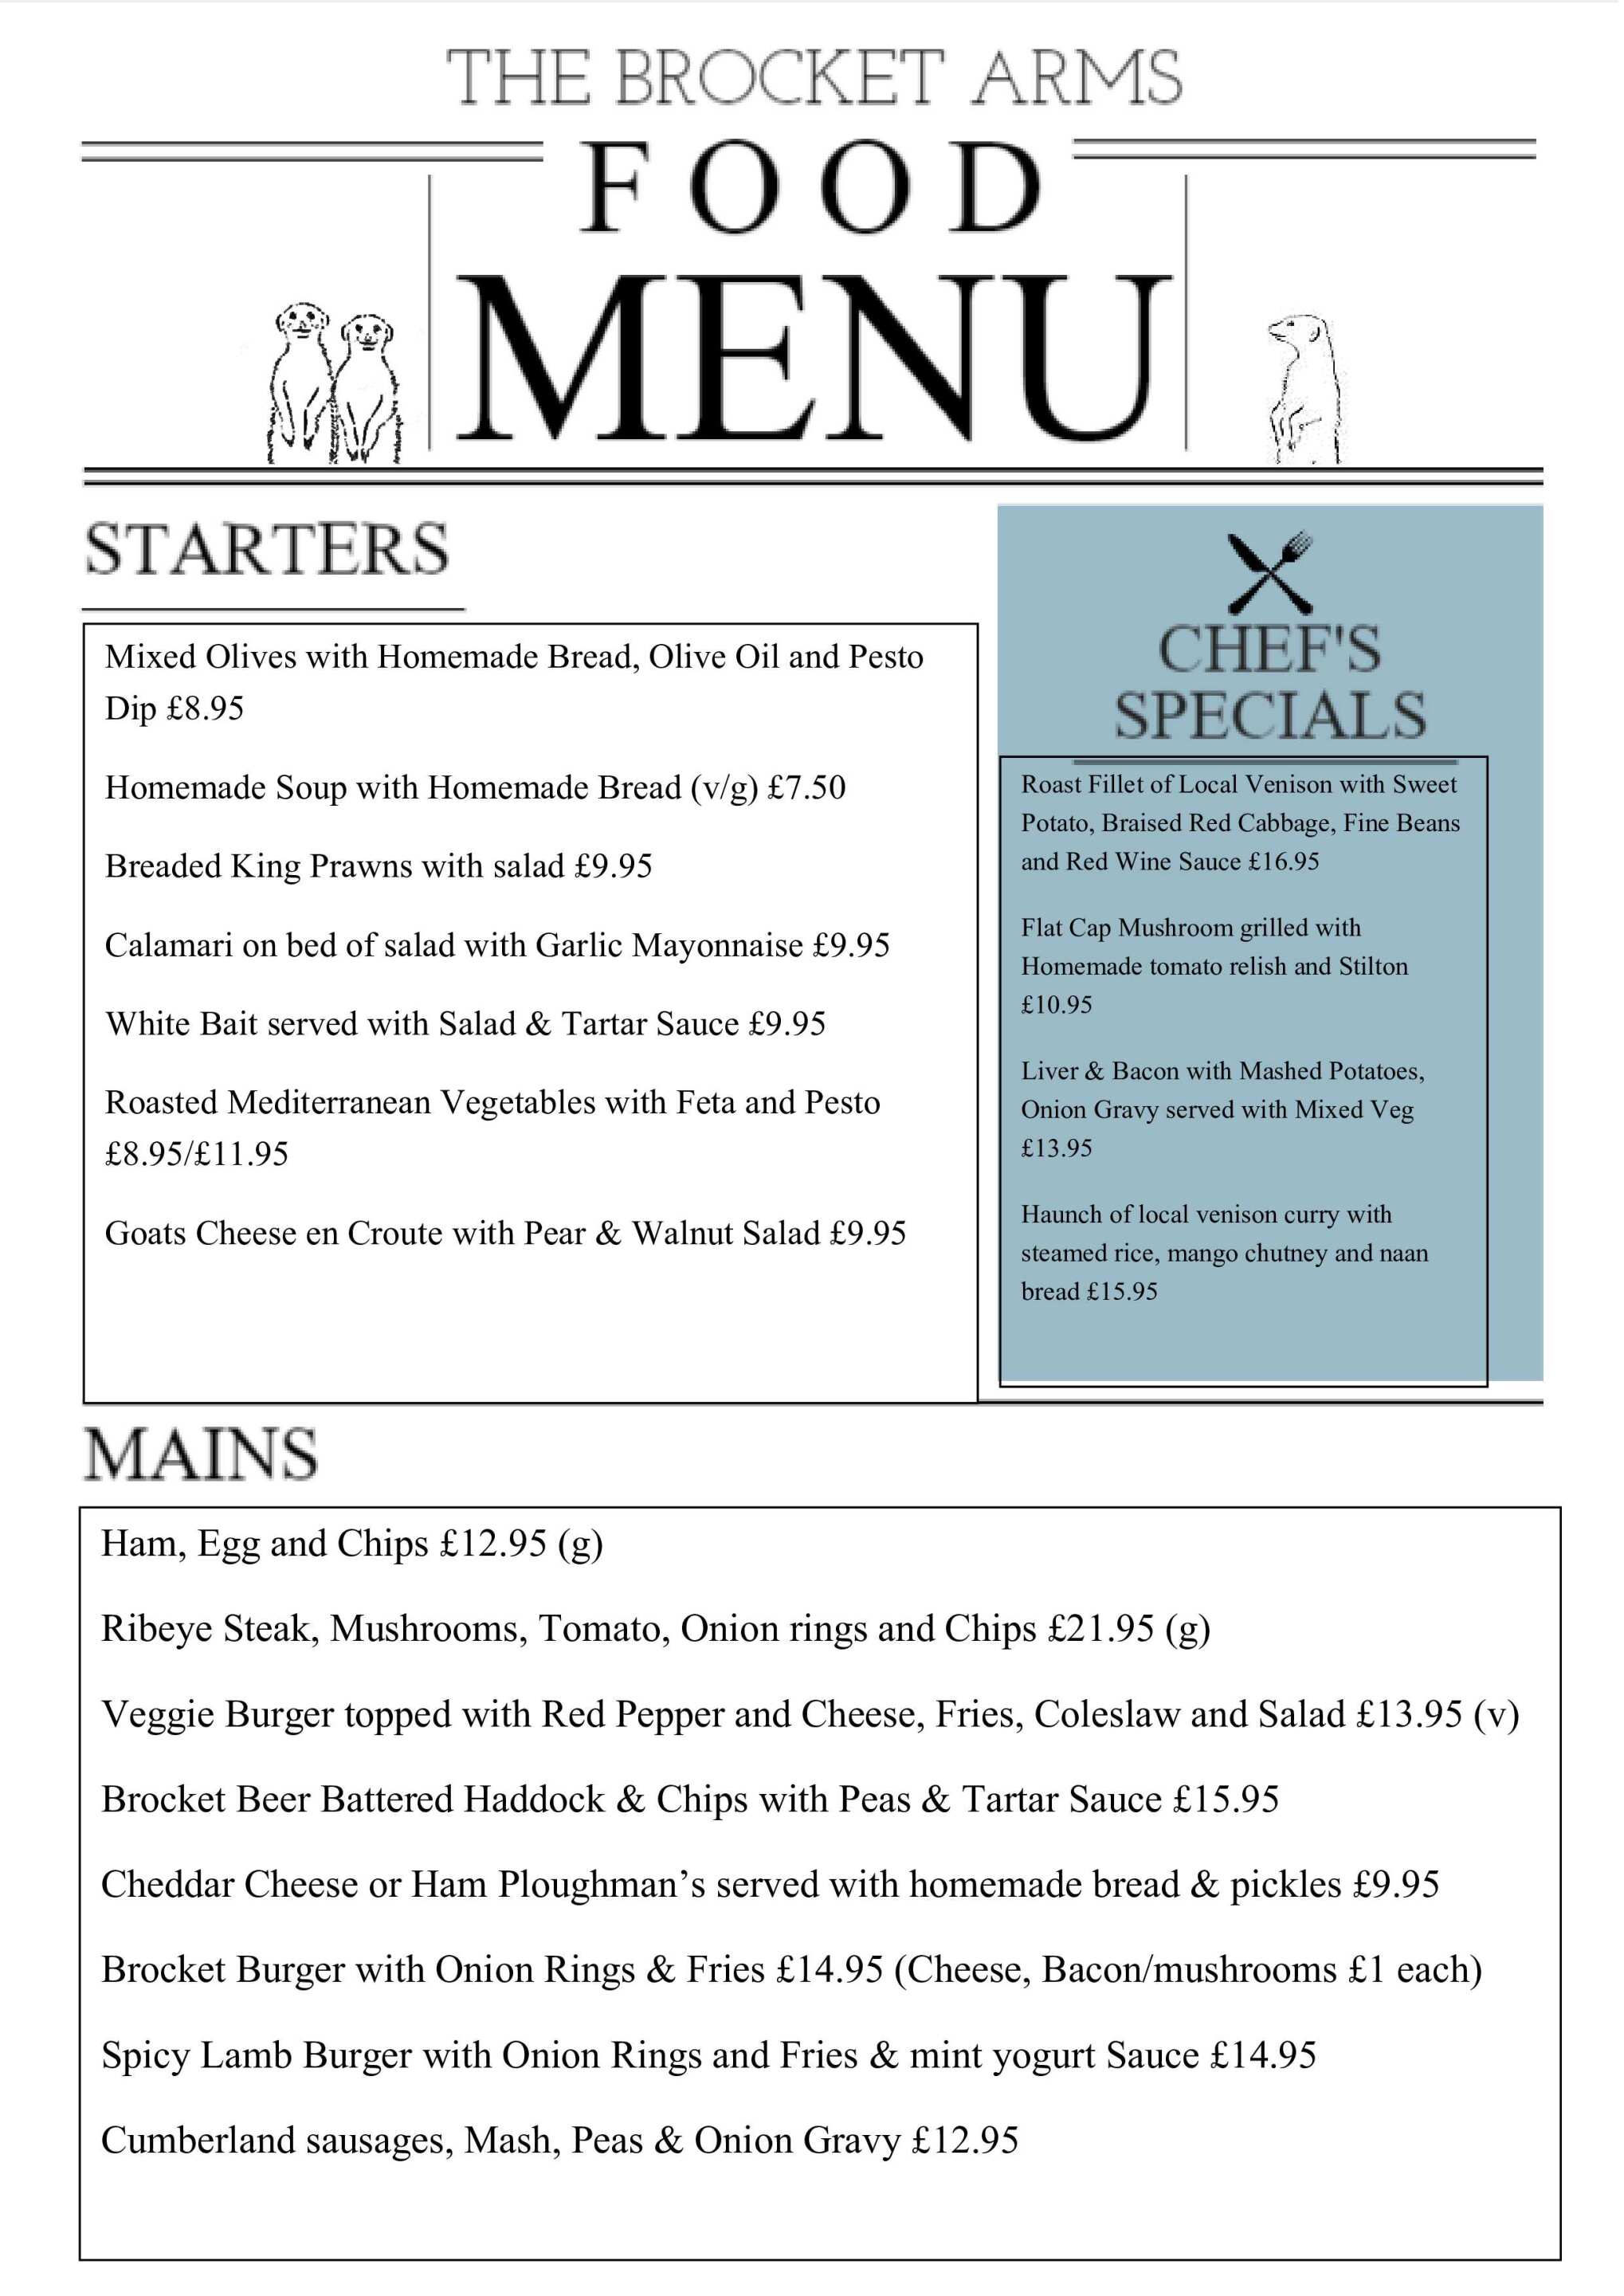 Weekday Menu - Starters, Mains and Specials